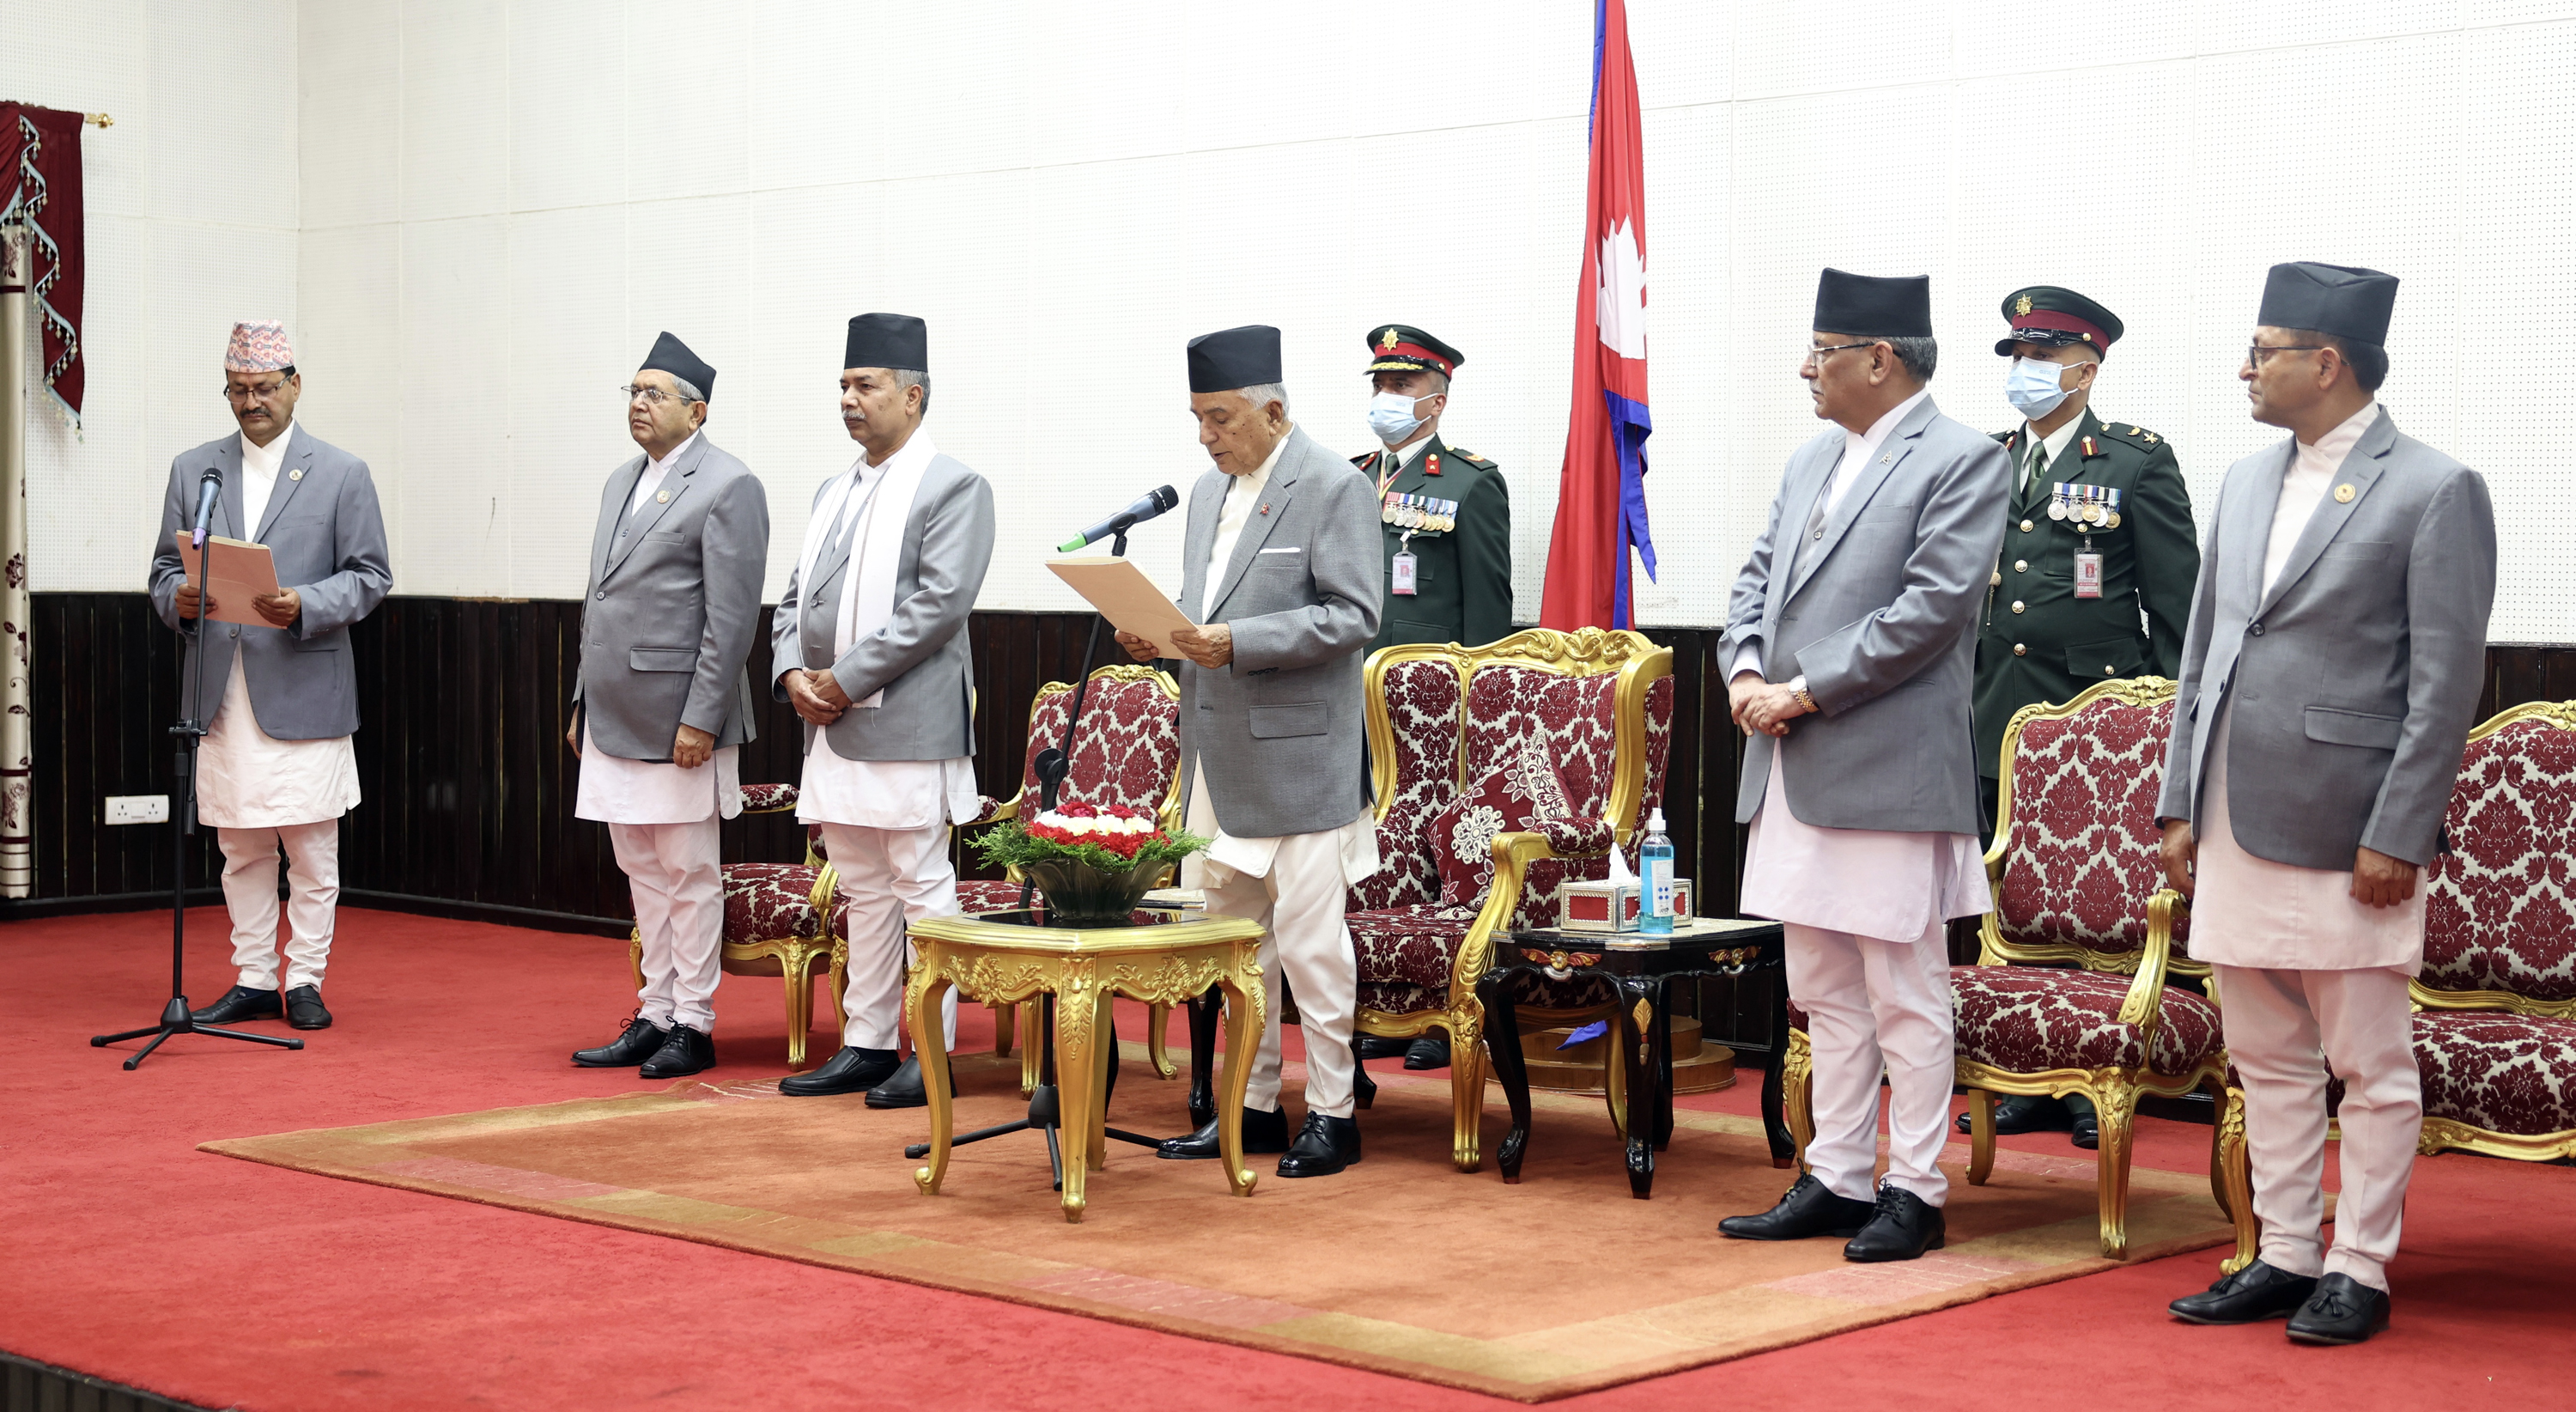 President Paudel administers oath to newly-appointed Foreign Minister Saud